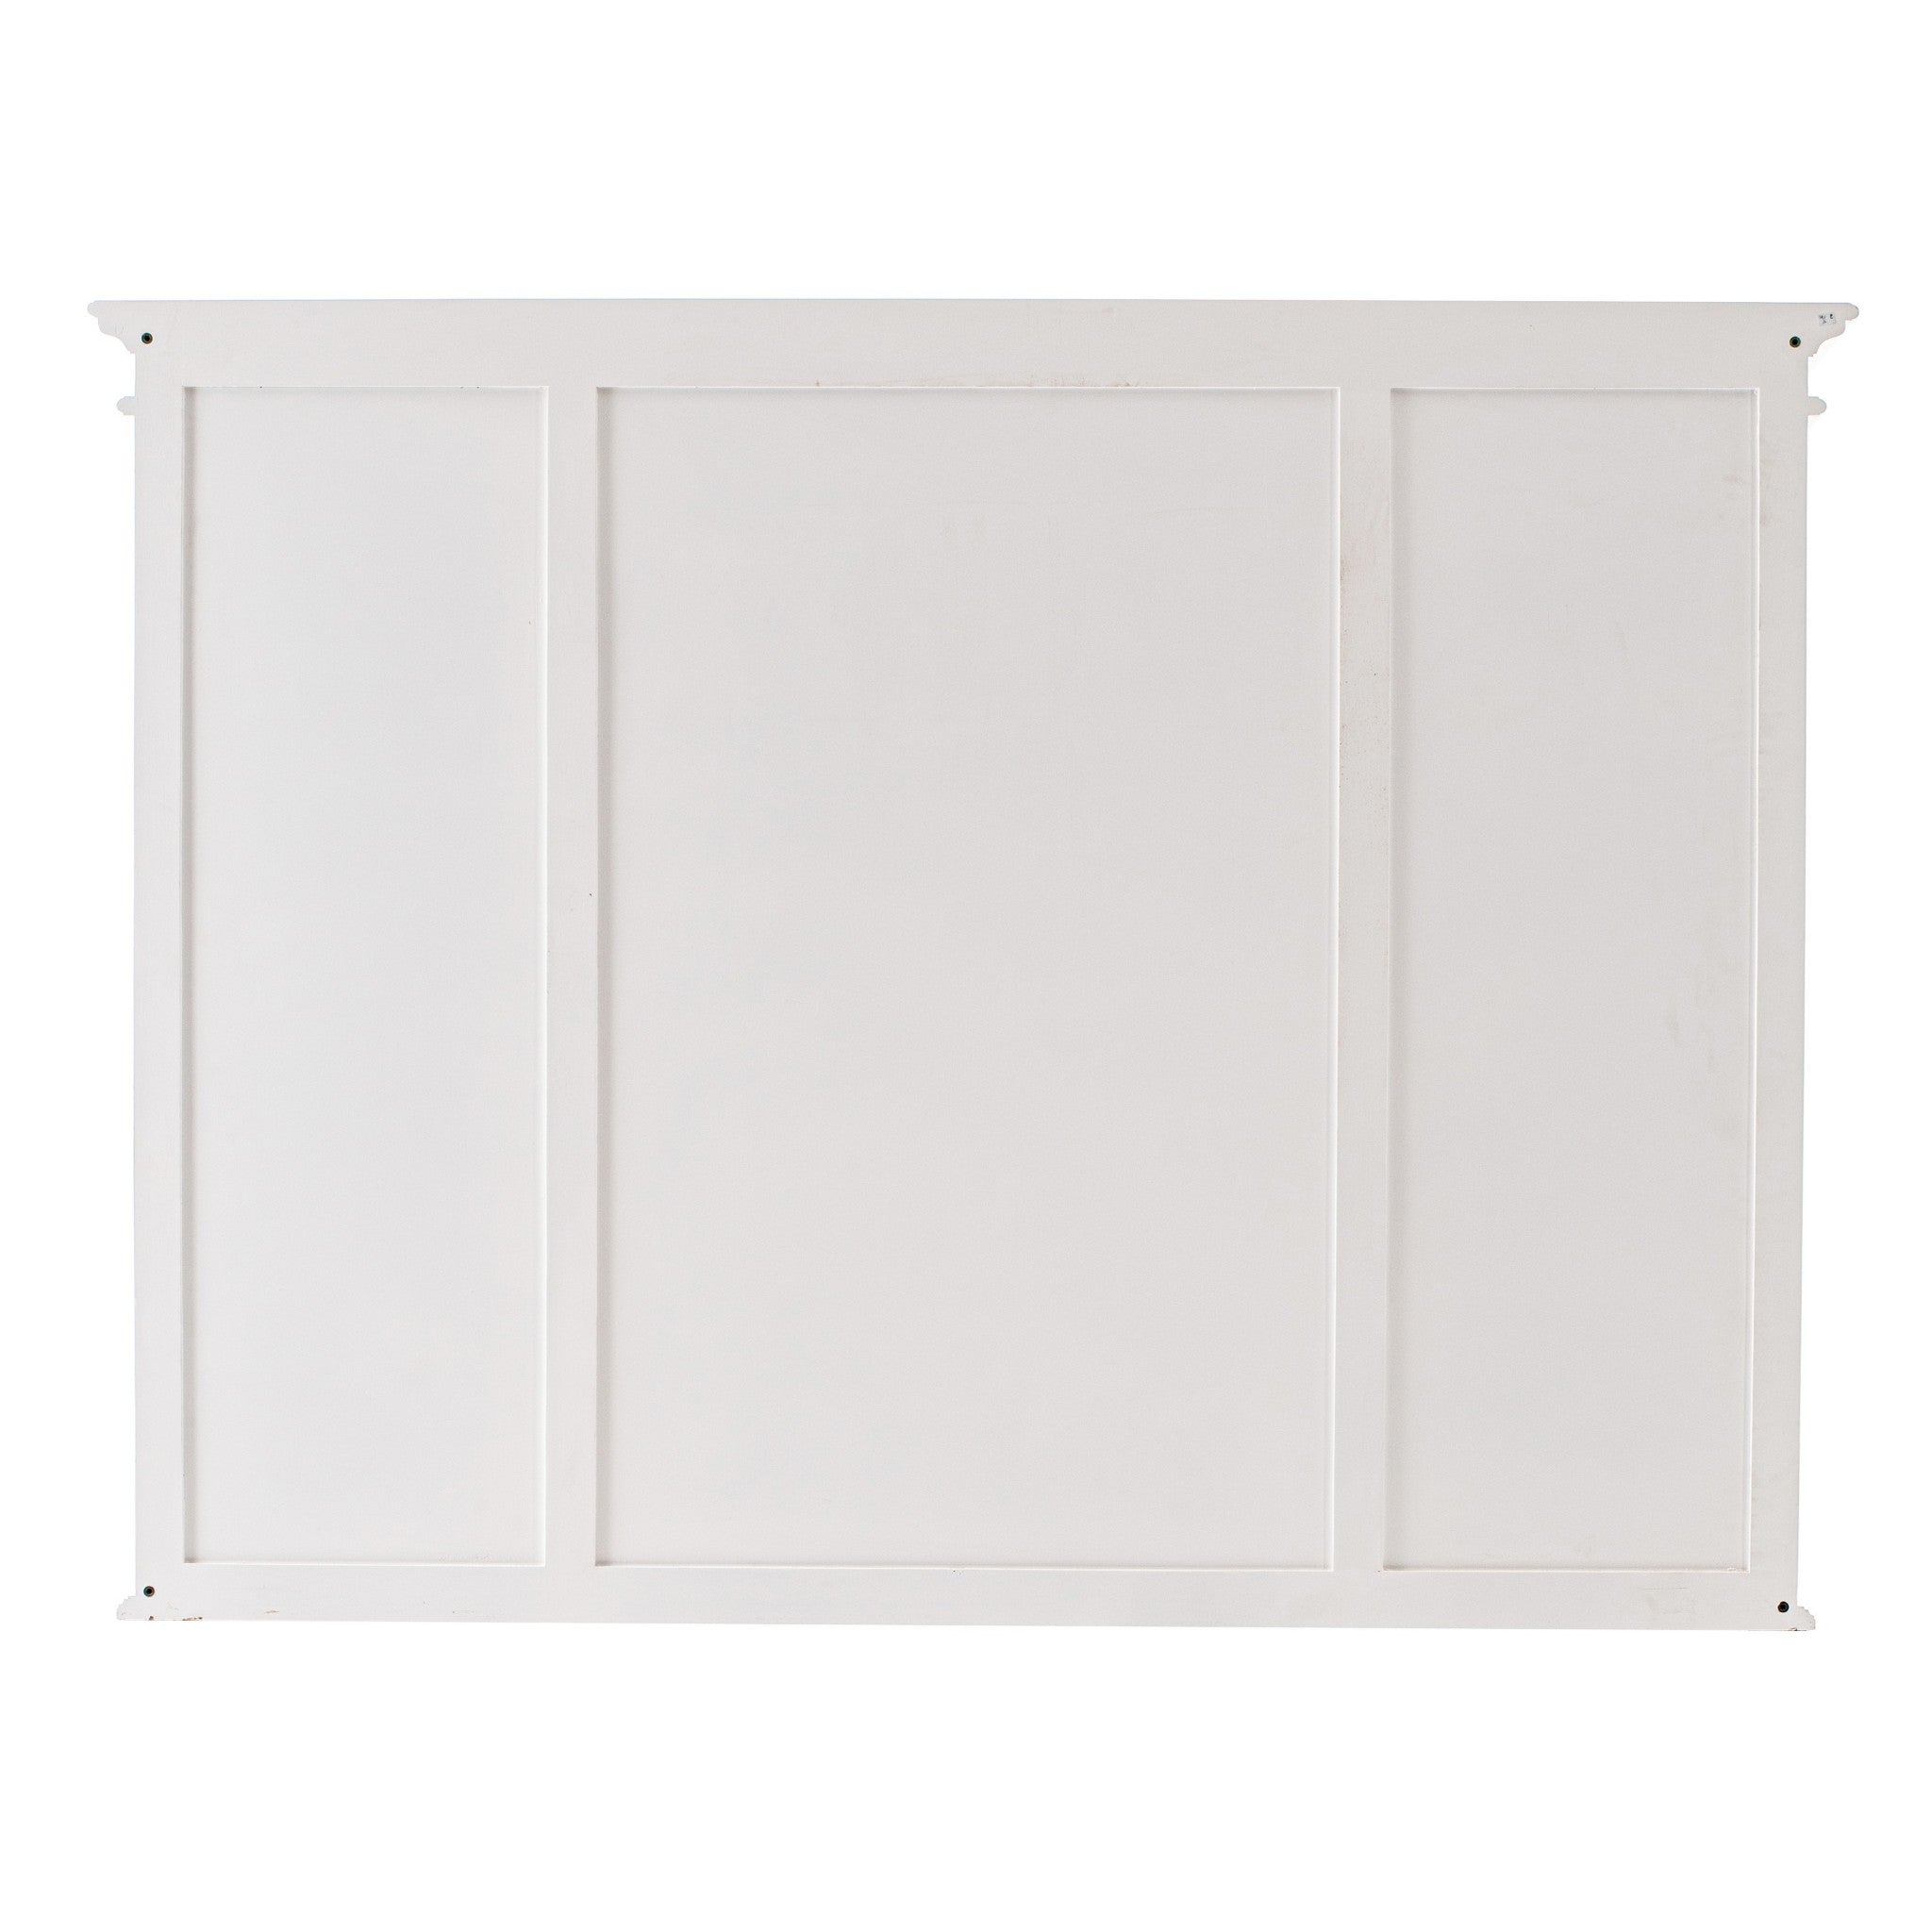 71" White Dining Hutch With Twelve Shelves And Three Drawers